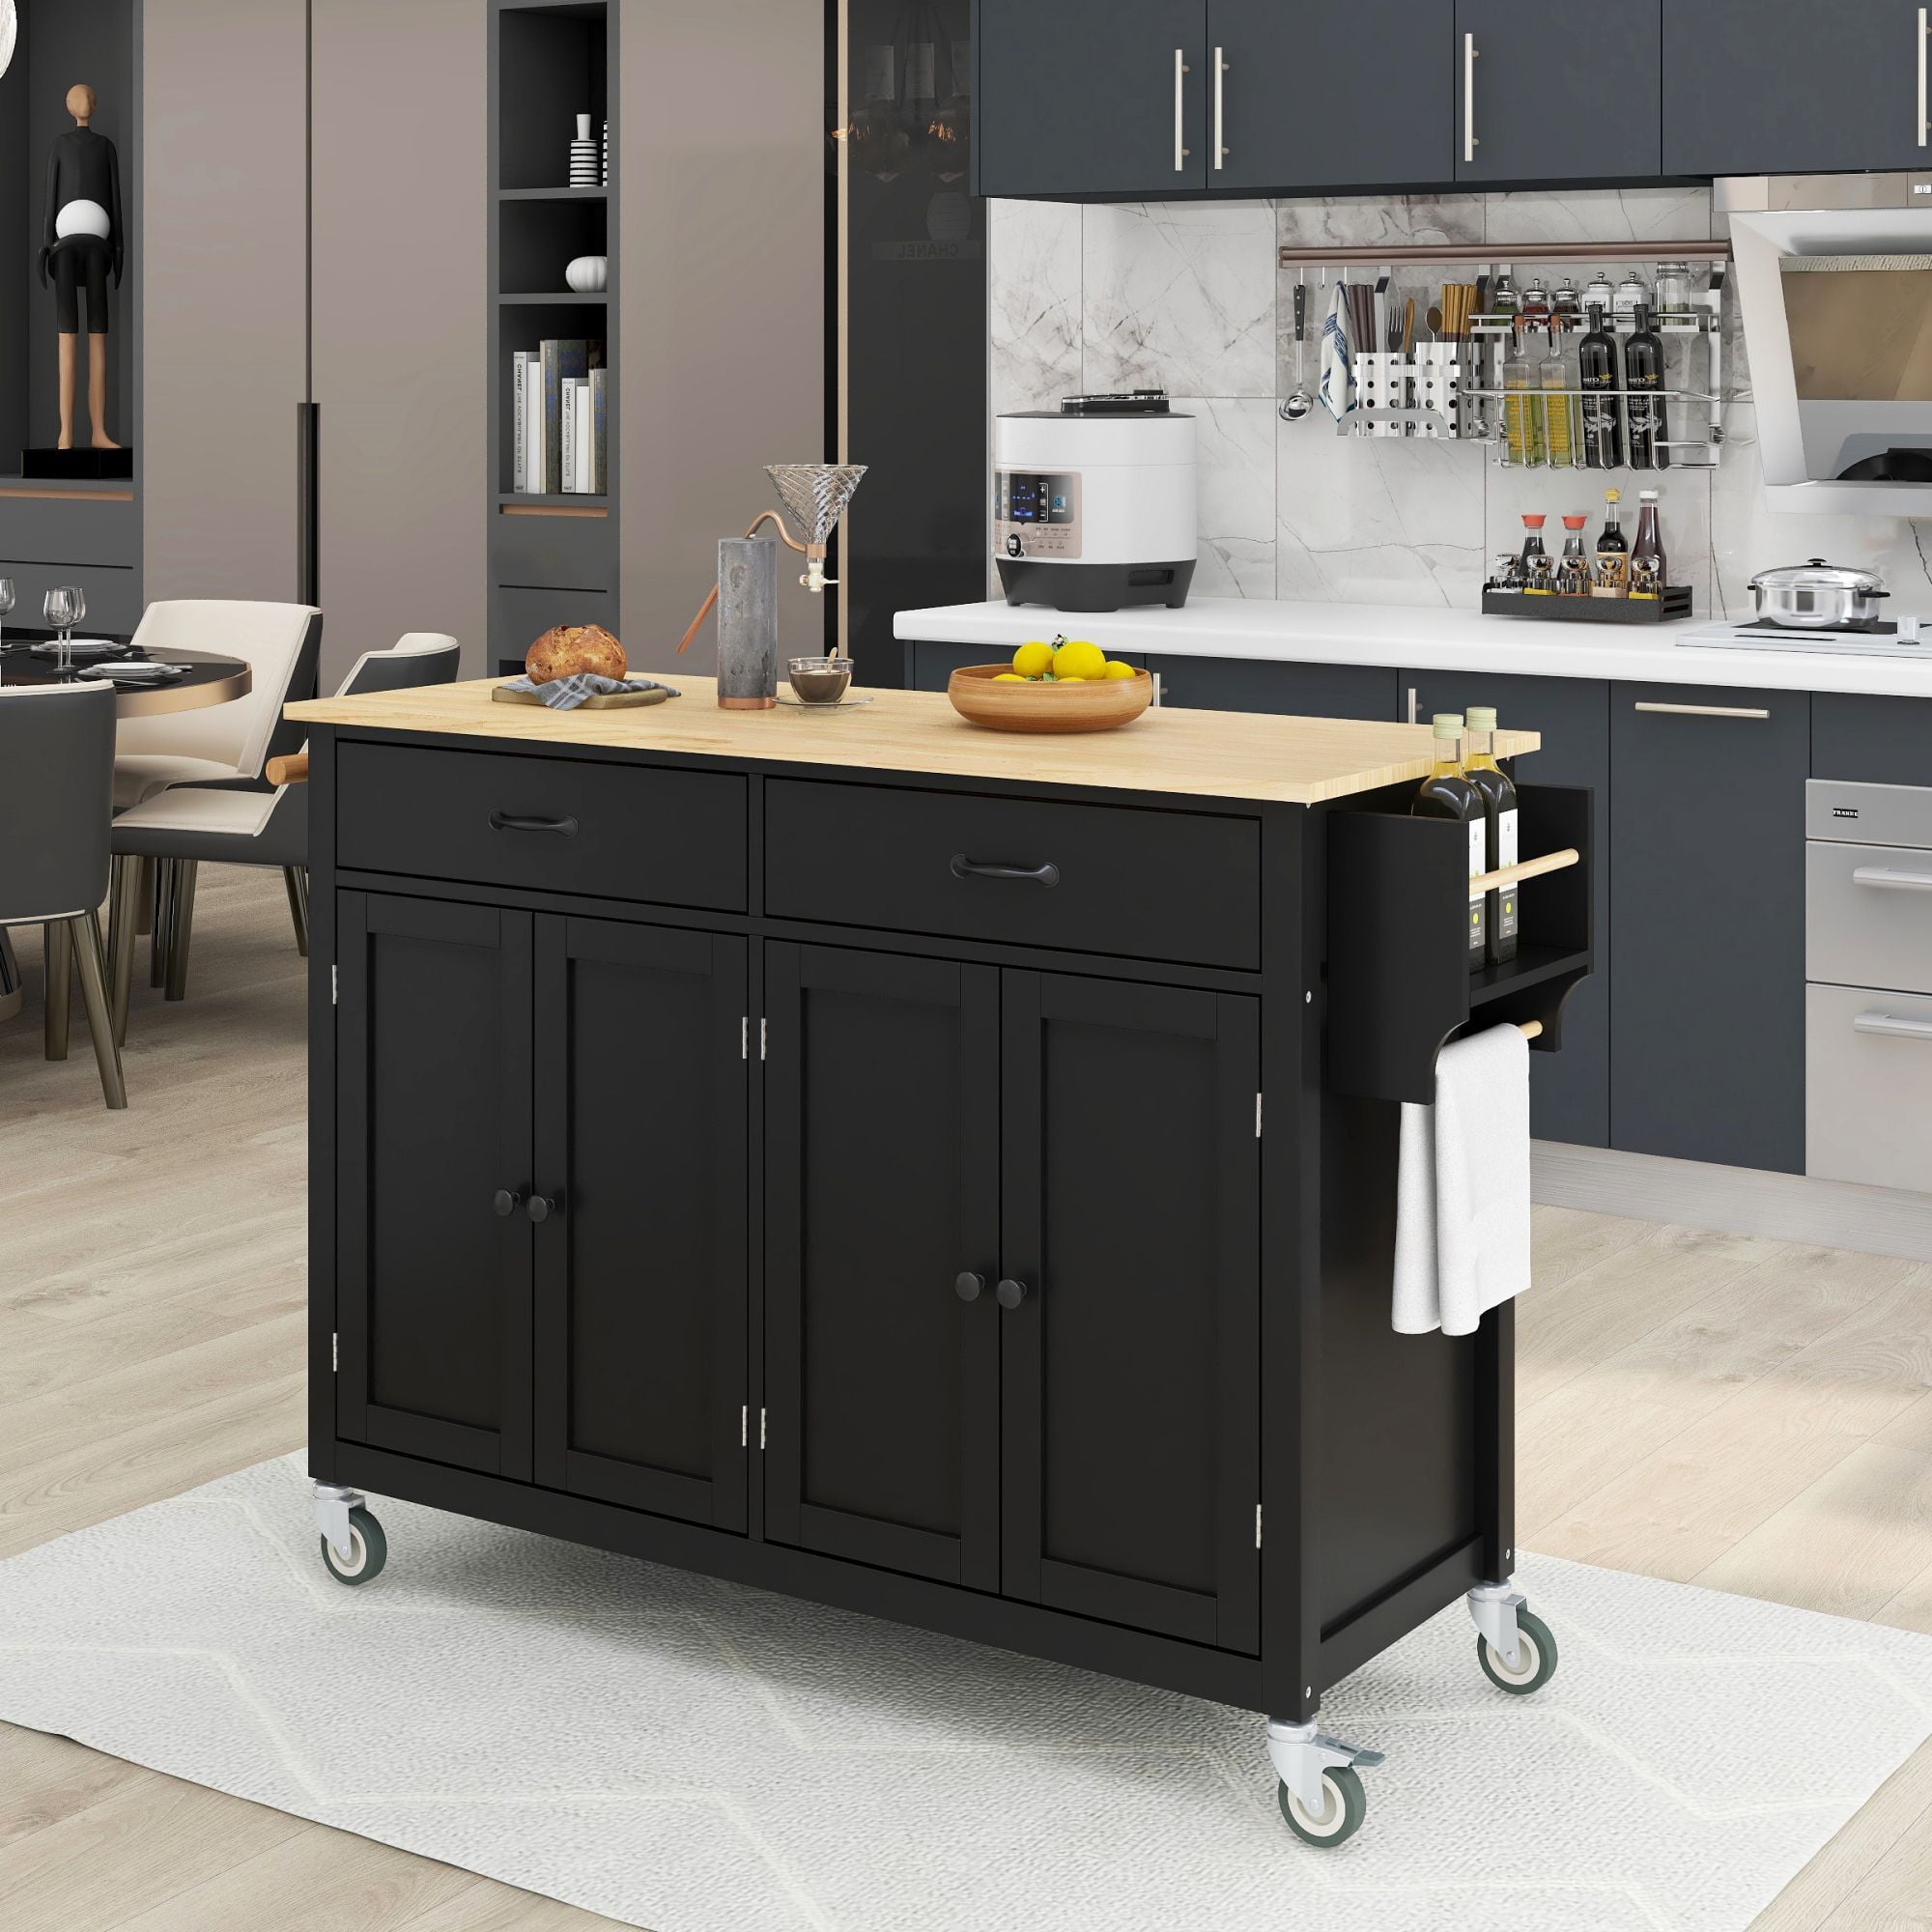 COOKCOK Kitchen Island Cart，Rolling Mobile Kitchen Island Cart with Wood Top and Locking Wheels，Storage Utility Cart with 4 Door Cabinet and Two Drawers，Spice Rack，Towel Rack，Black